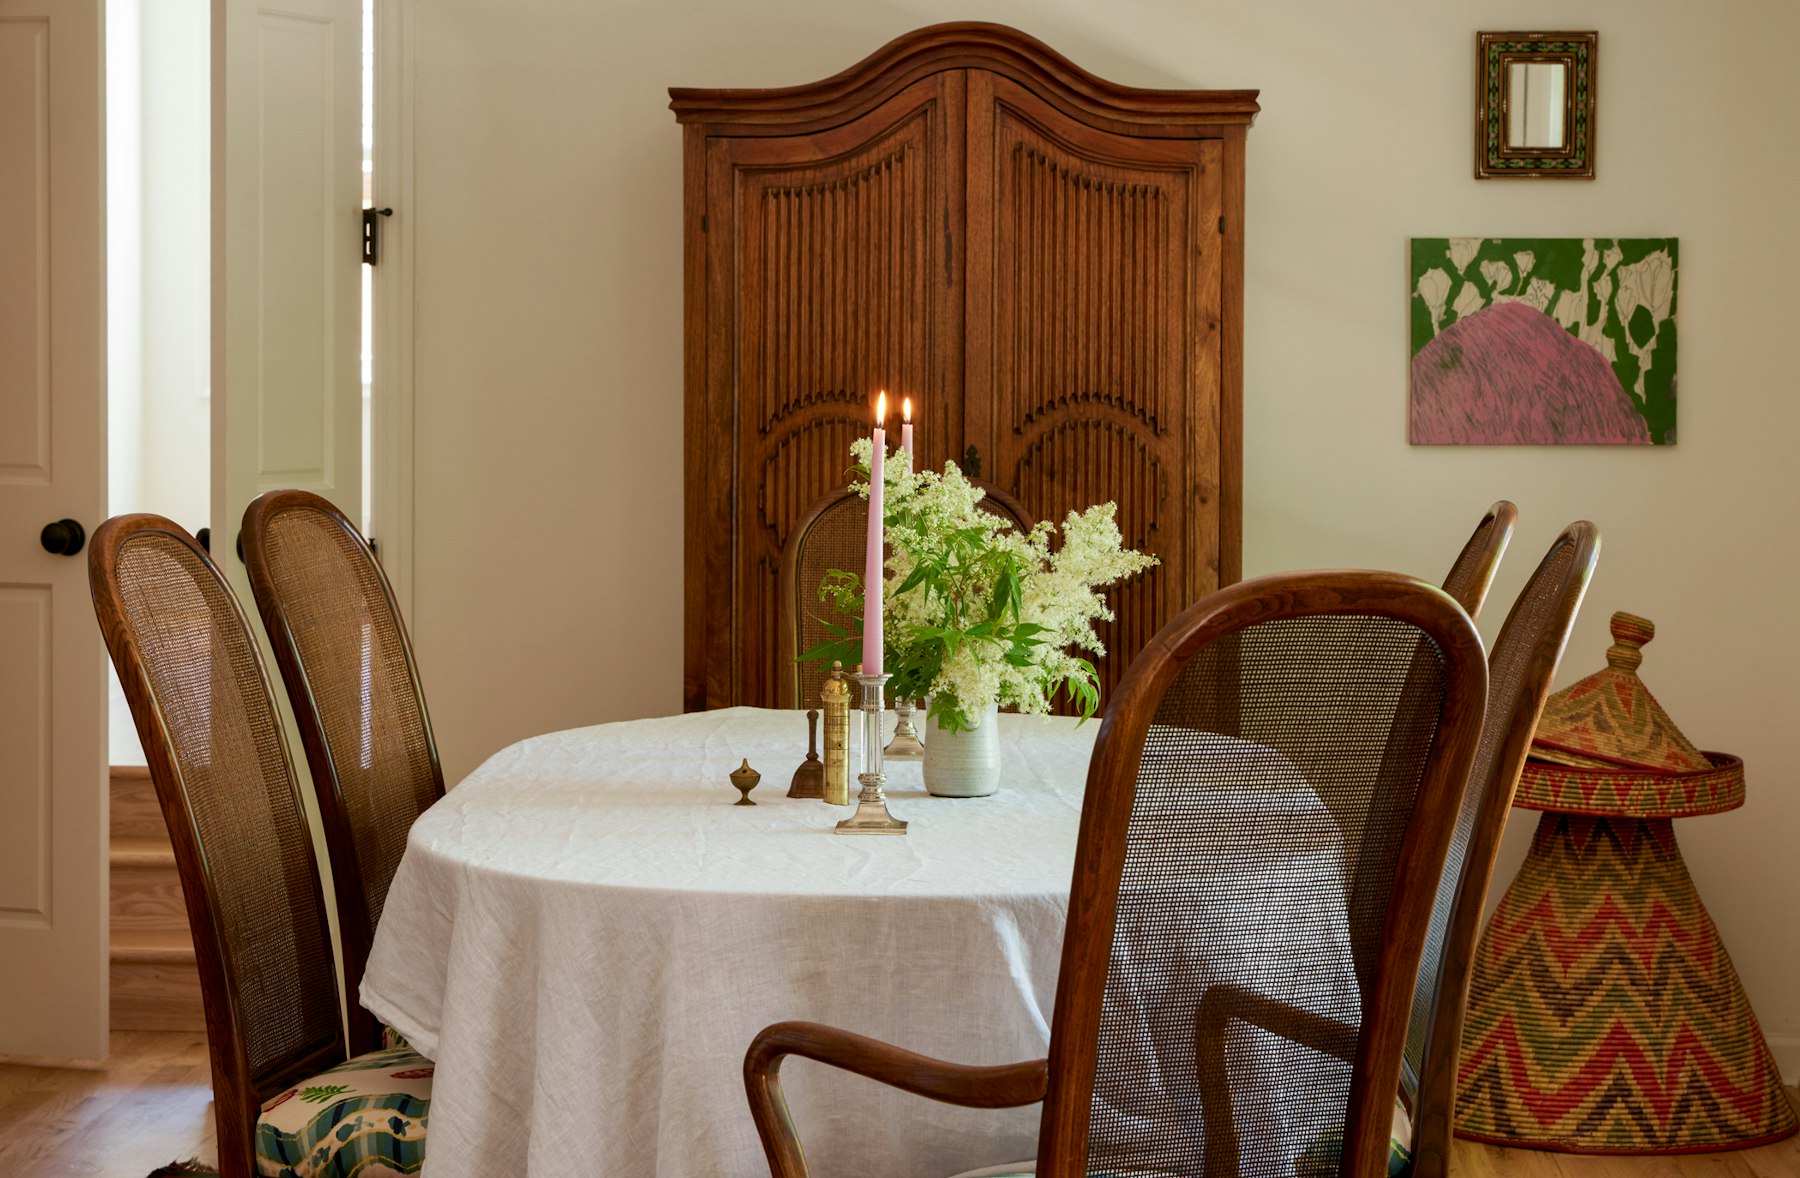 vintage cane chairs around oval table with linen tablecloth